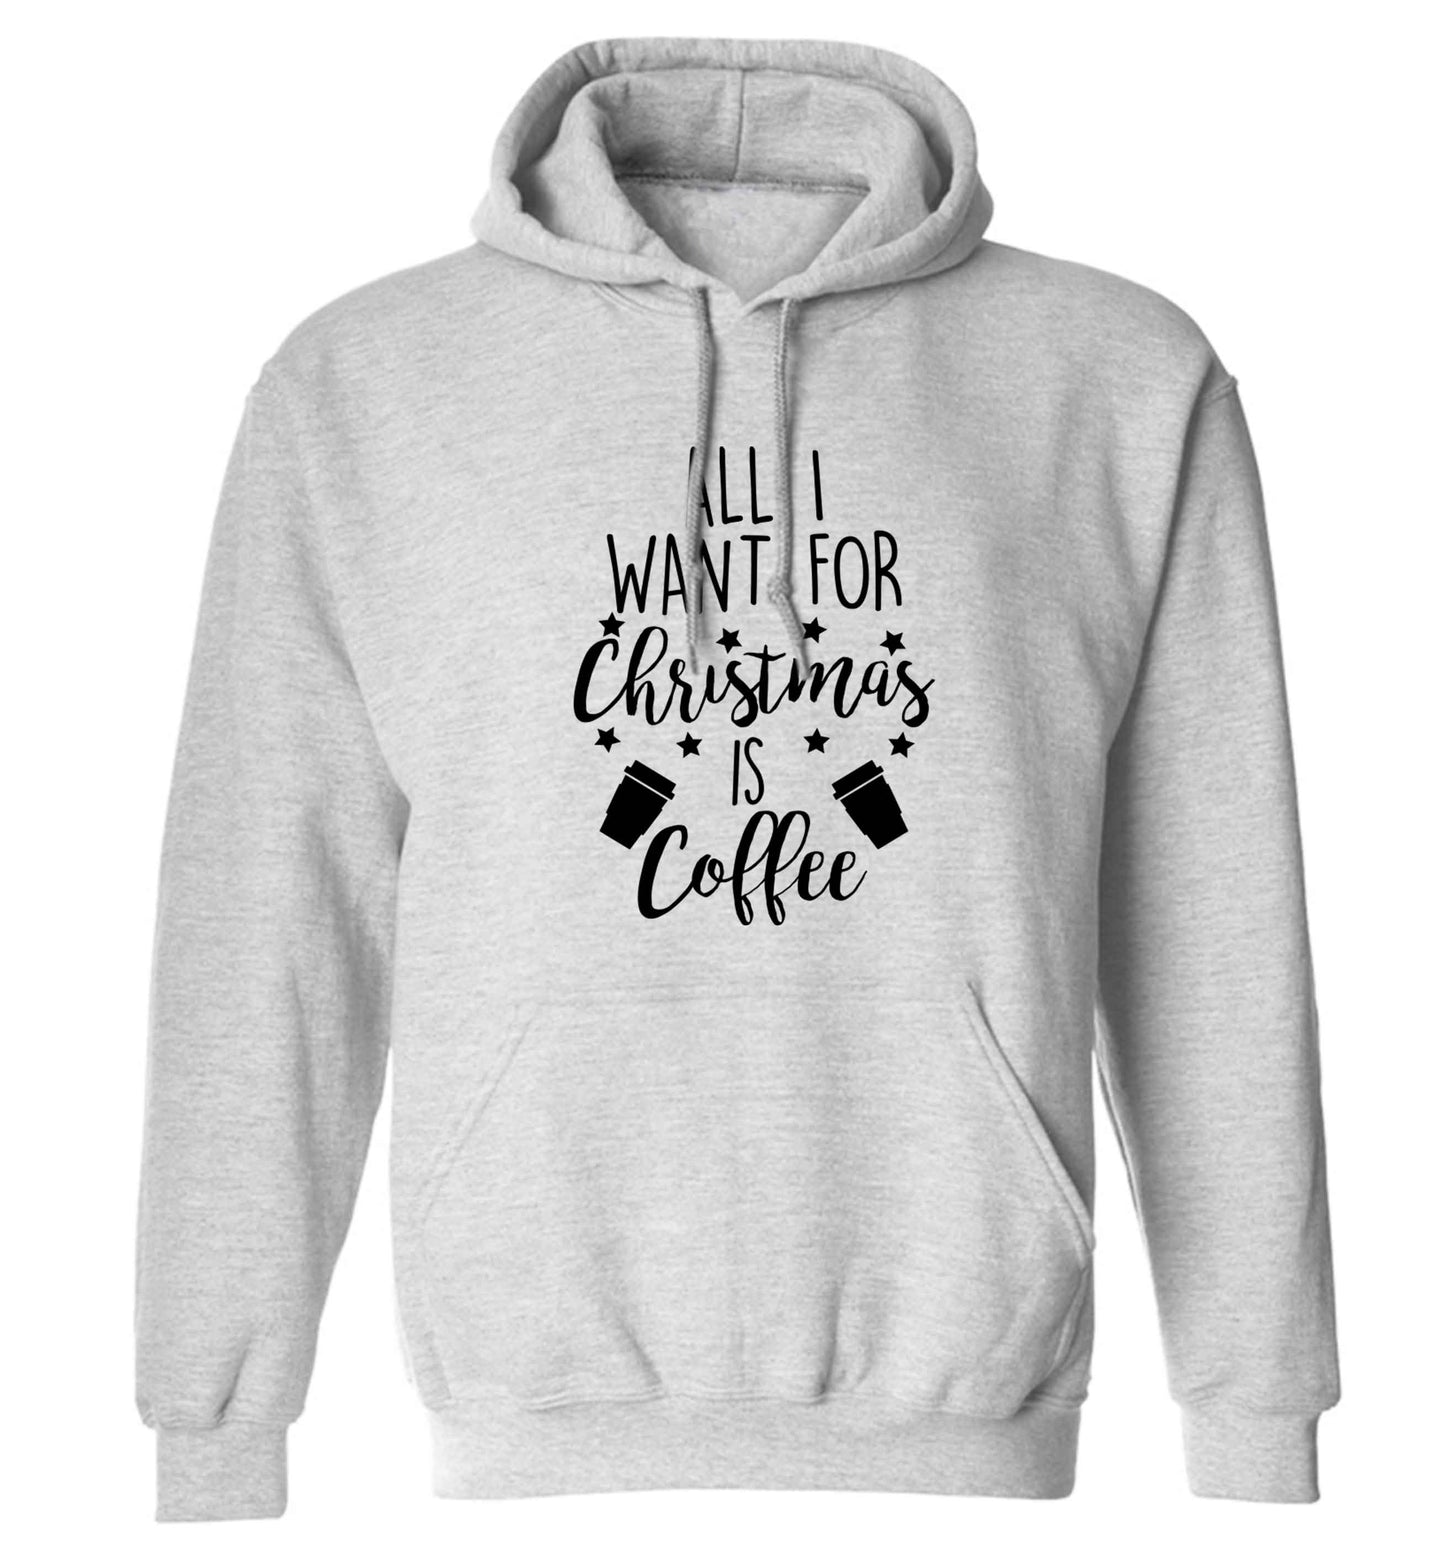 All I want for Christmas is coffee adults unisex grey hoodie 2XL